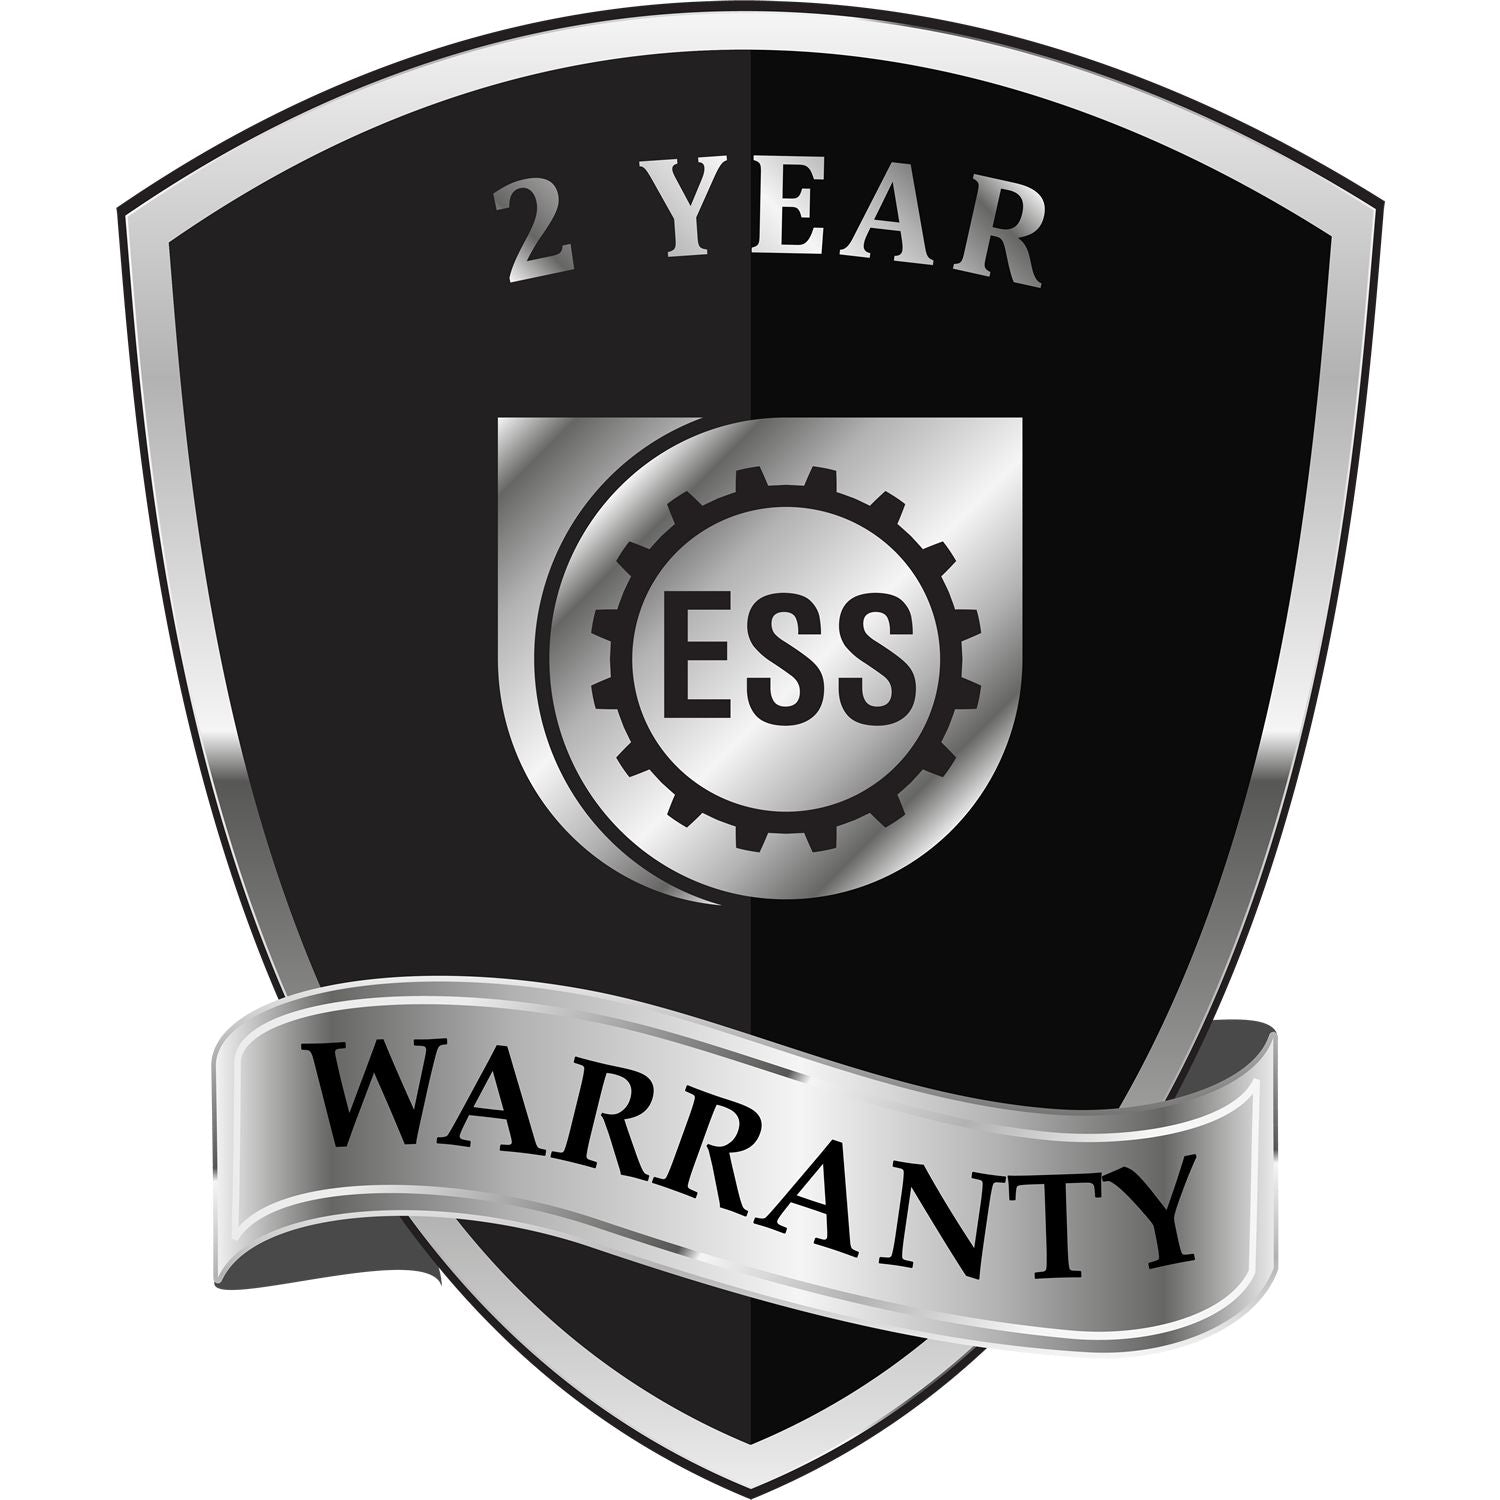 A badge or emblem showing a warranty icon for the State of Colorado Extended Long Reach Engineer Seal